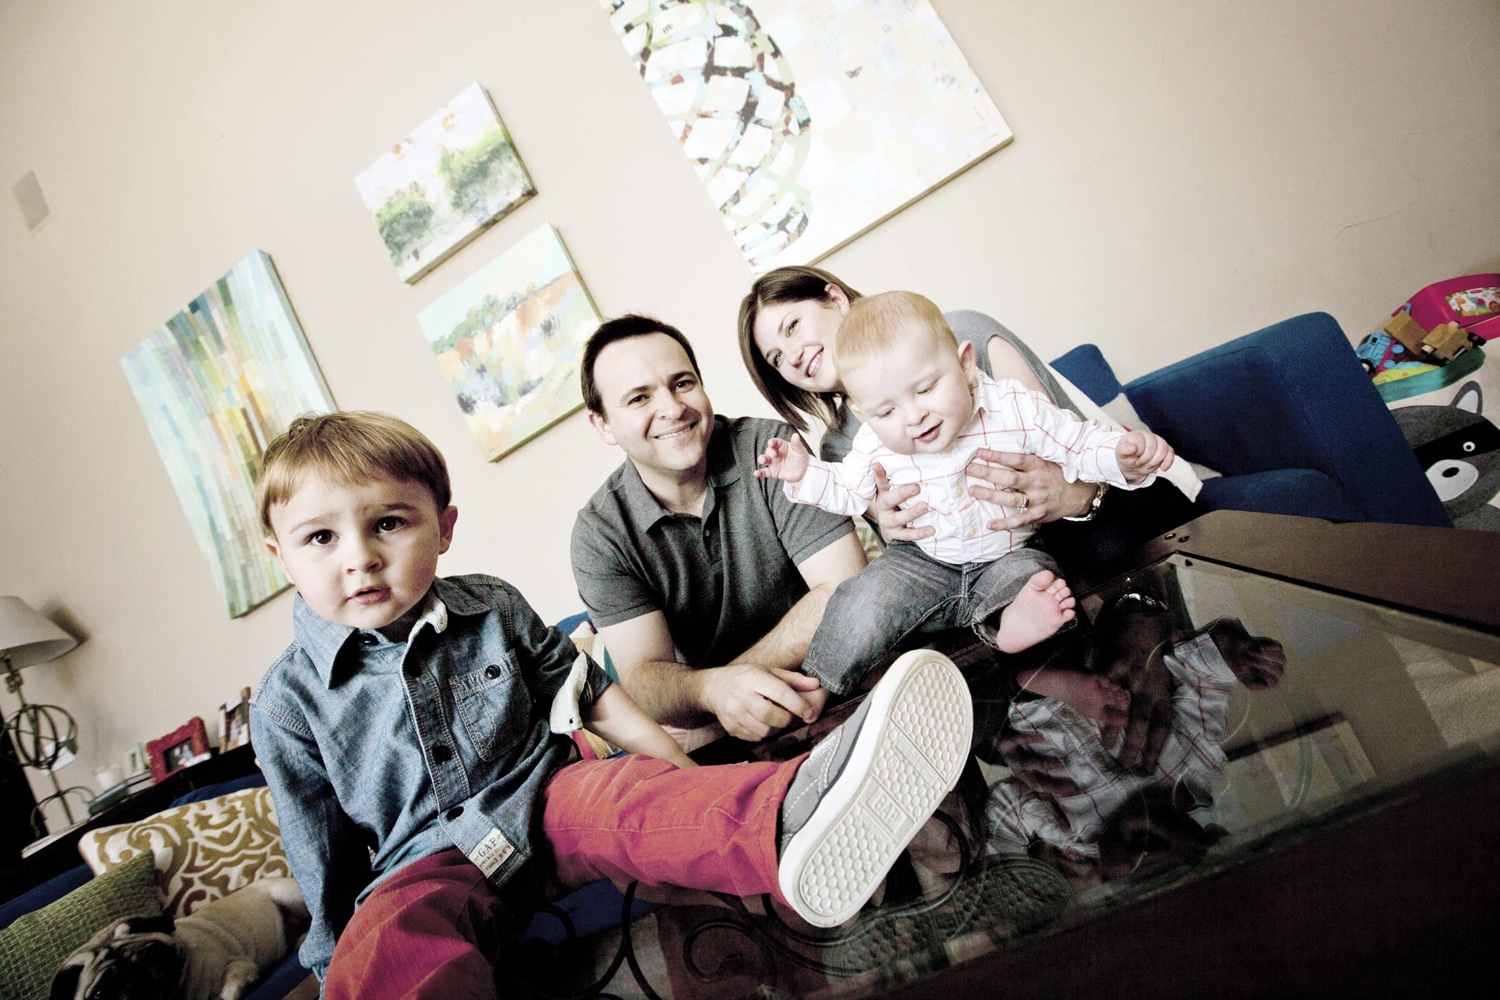 A family of four's photo is taken in their home.